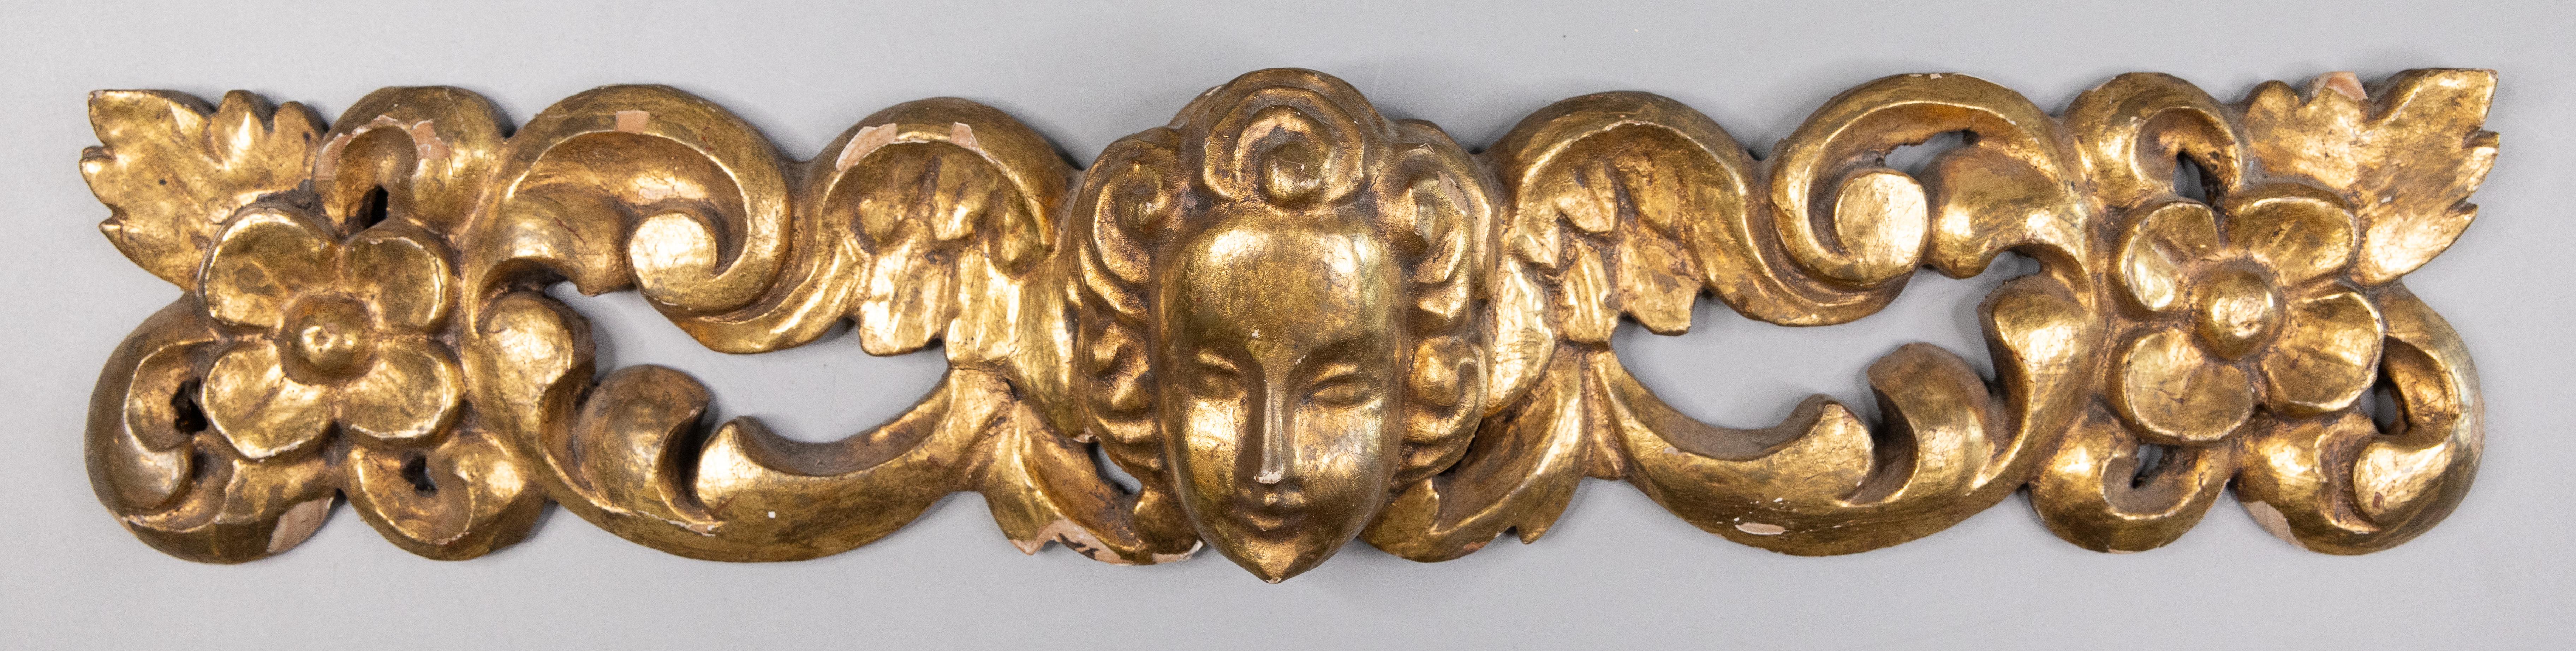 18th Century Italian Carved Giltwood Cherub Architectural Fragment Wall Hanging For Sale 1